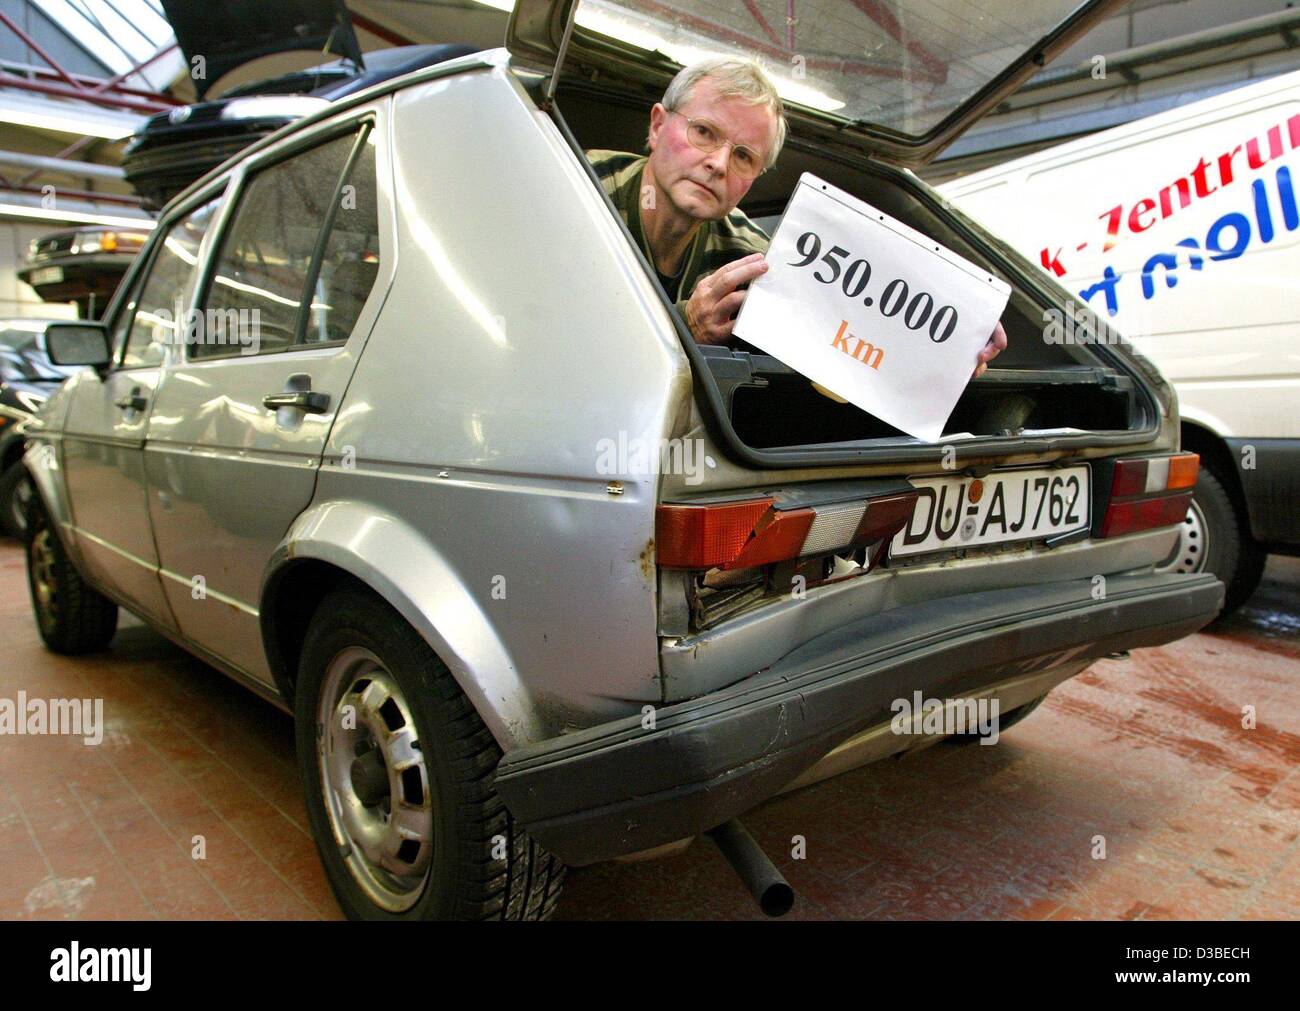 (dpa) - Hans-Dieter Gehlen from Duisburg looks out of his car holding a sign which says '950,000km' in Duesseldorf, Germany, 15 January 2003. Exactly one year ago, newspapers reported that Gehlen's VW Golf (70 hp, built in 1983) had rolled 900,000km with its first engine. Since then, it is heading f Stock Photo